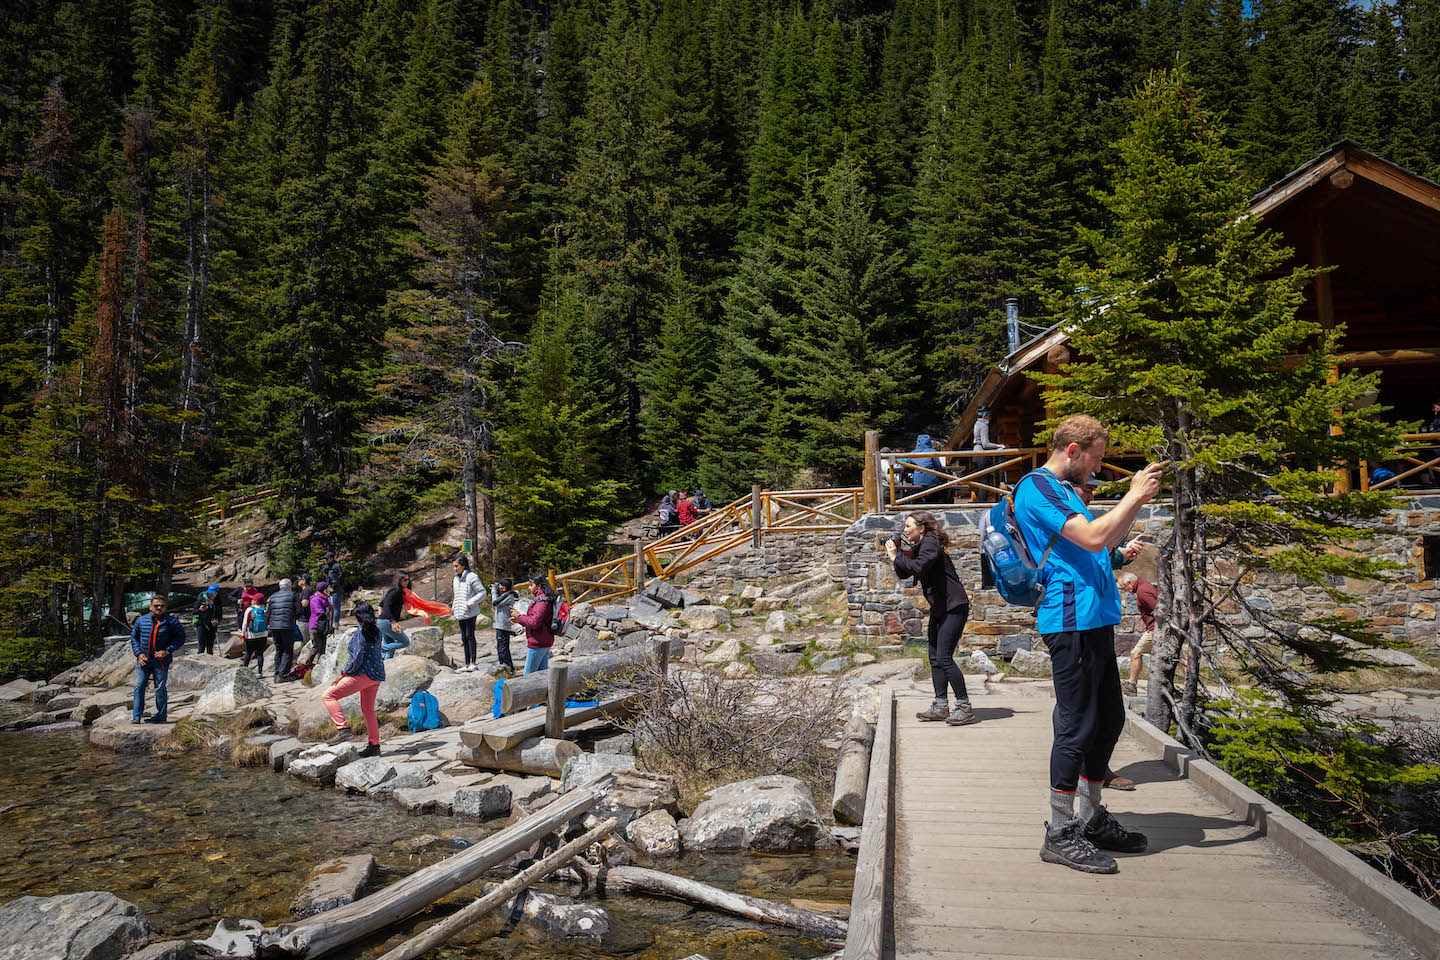 Lake Agnes Teahouse in summer - busy!